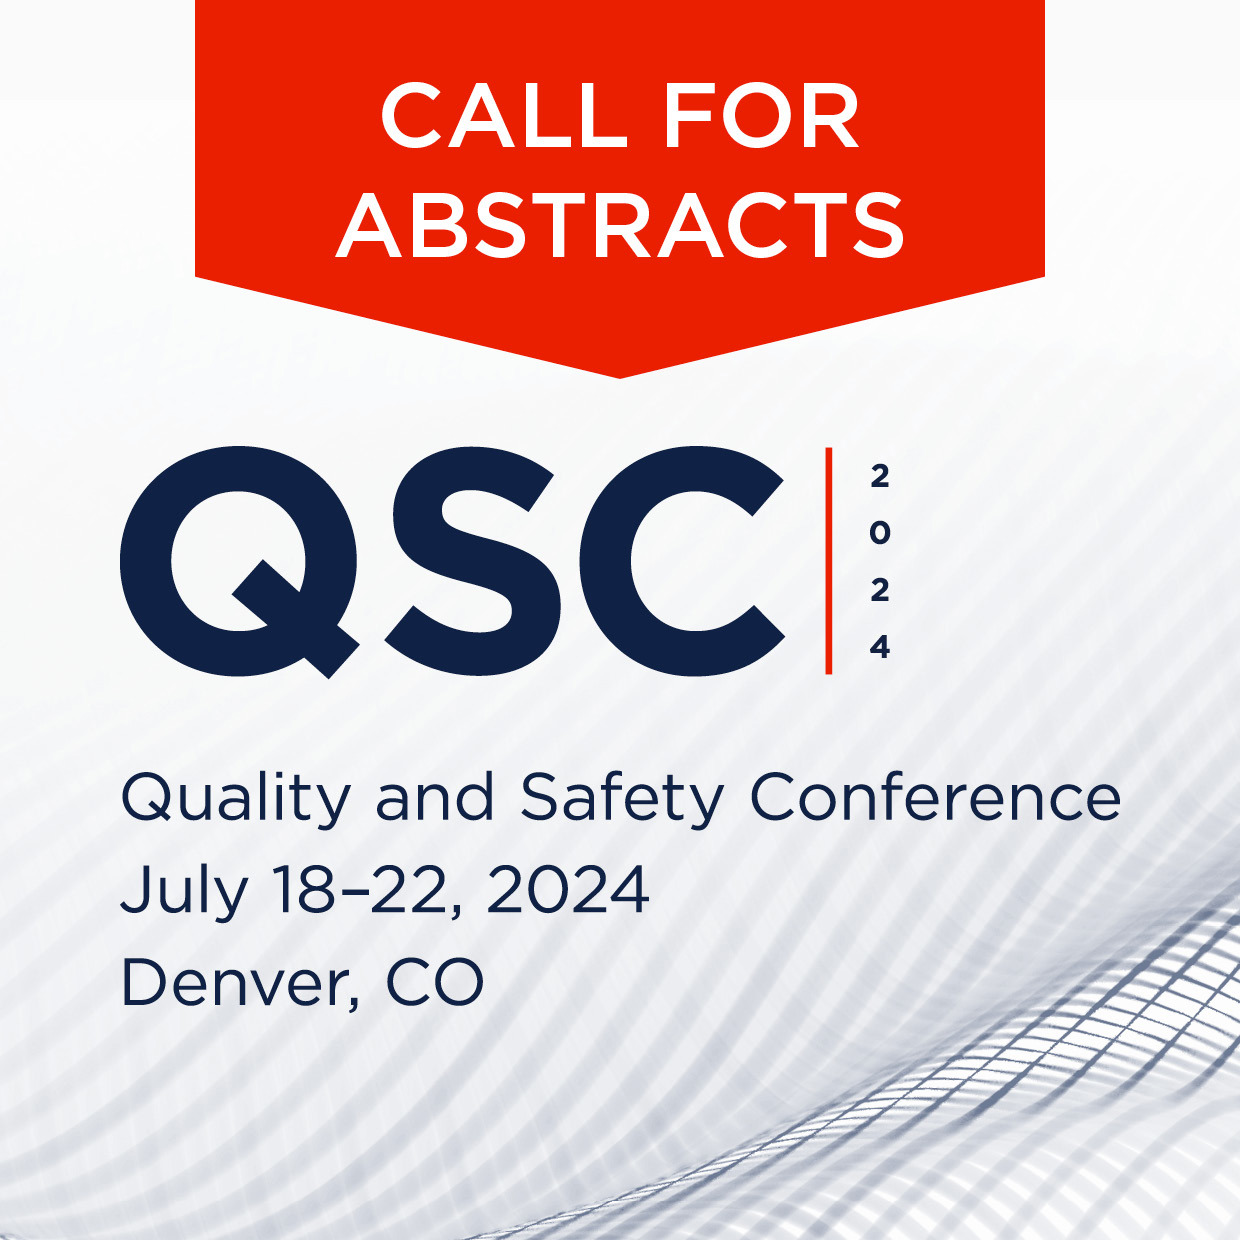 Quality and Safety Conference